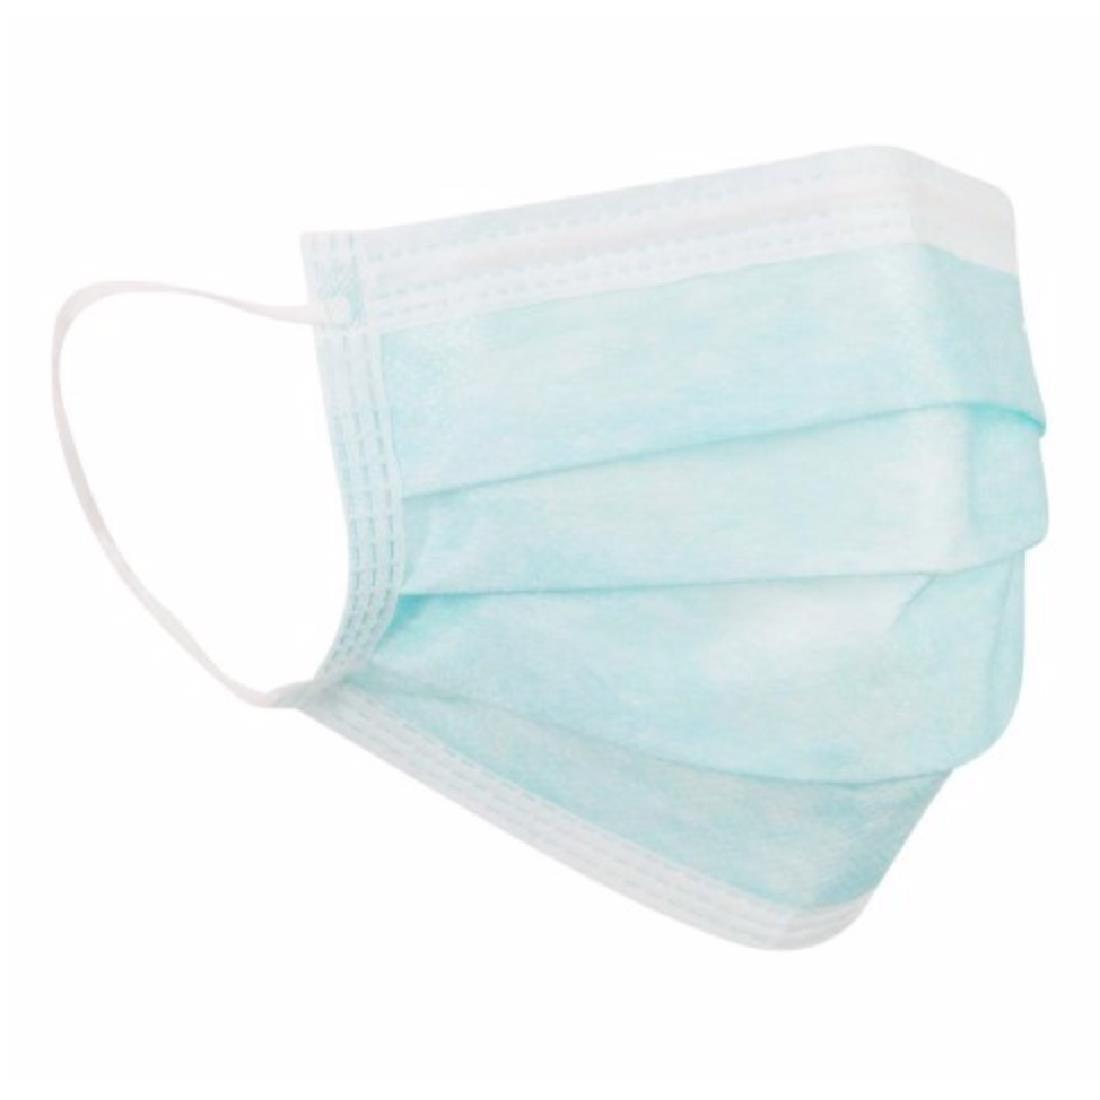 Obrush Surgical Face Masks Type IIR ASTM Level 2 | Type 2R - Pack of 50 - DE743 - 1